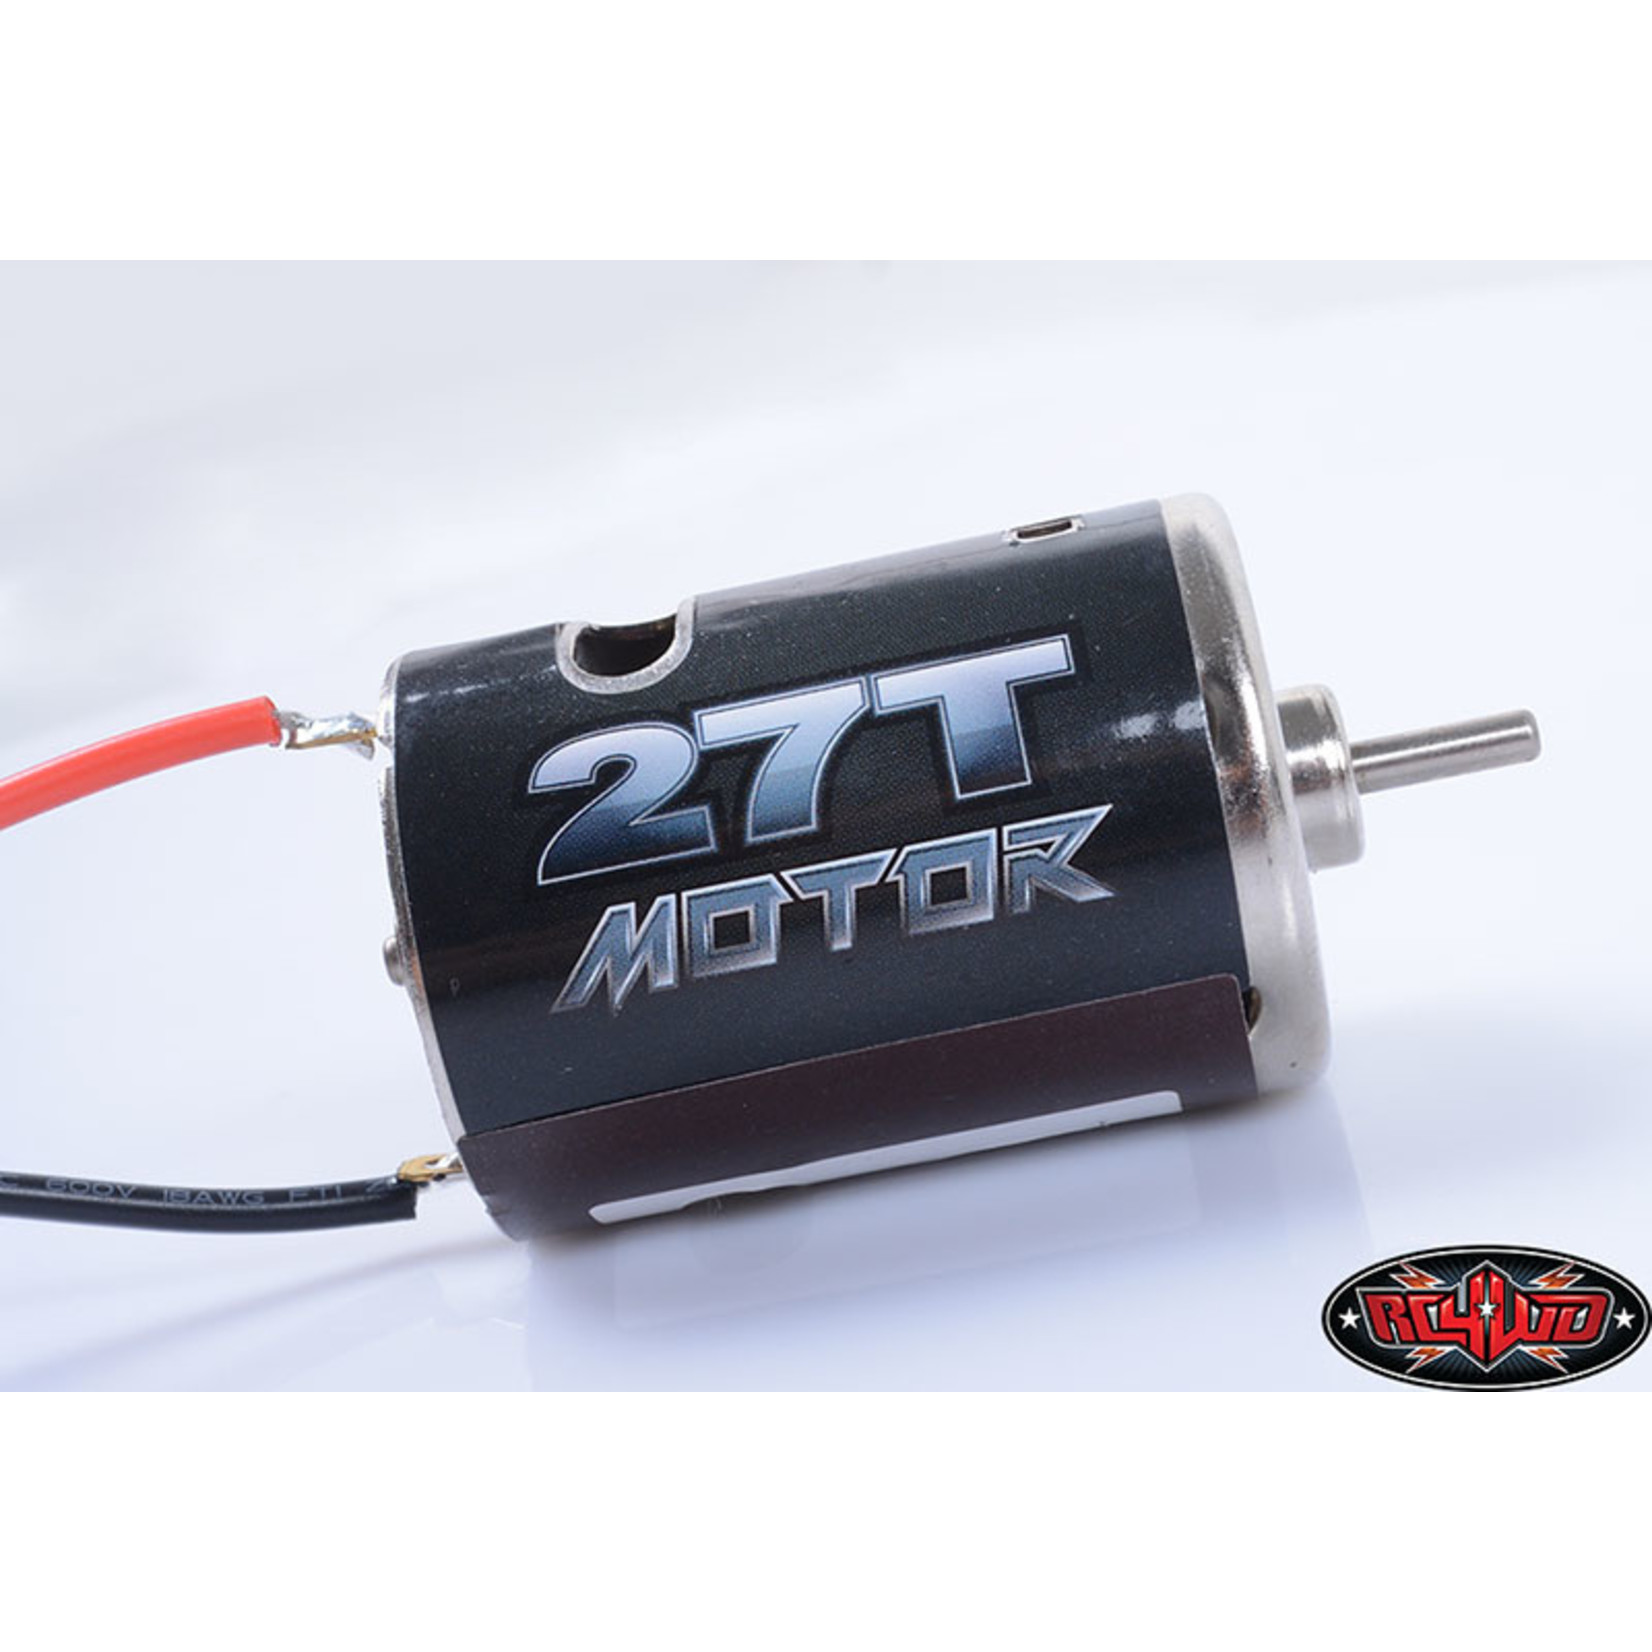 RC4WD RC4ZE0067 RC4WD 540 Crawler Brushed Motor 27T